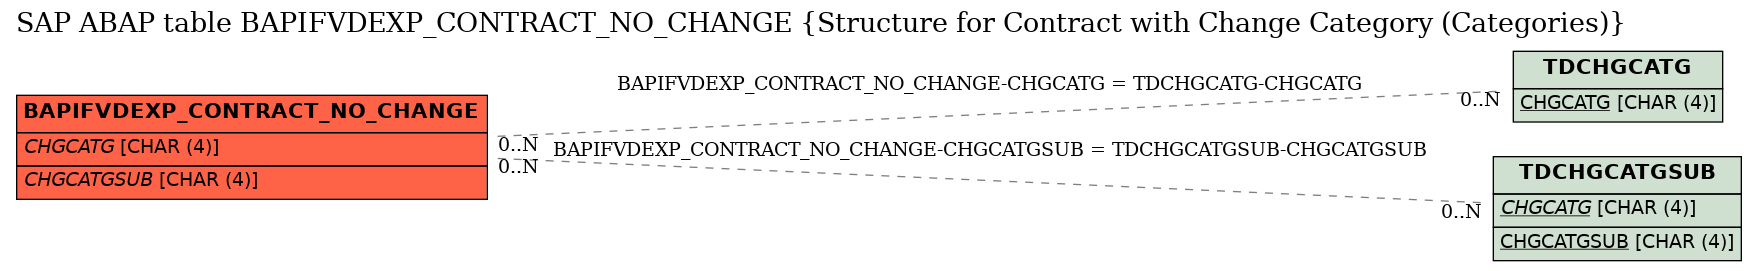 E-R Diagram for table BAPIFVDEXP_CONTRACT_NO_CHANGE (Structure for Contract with Change Category (Categories))